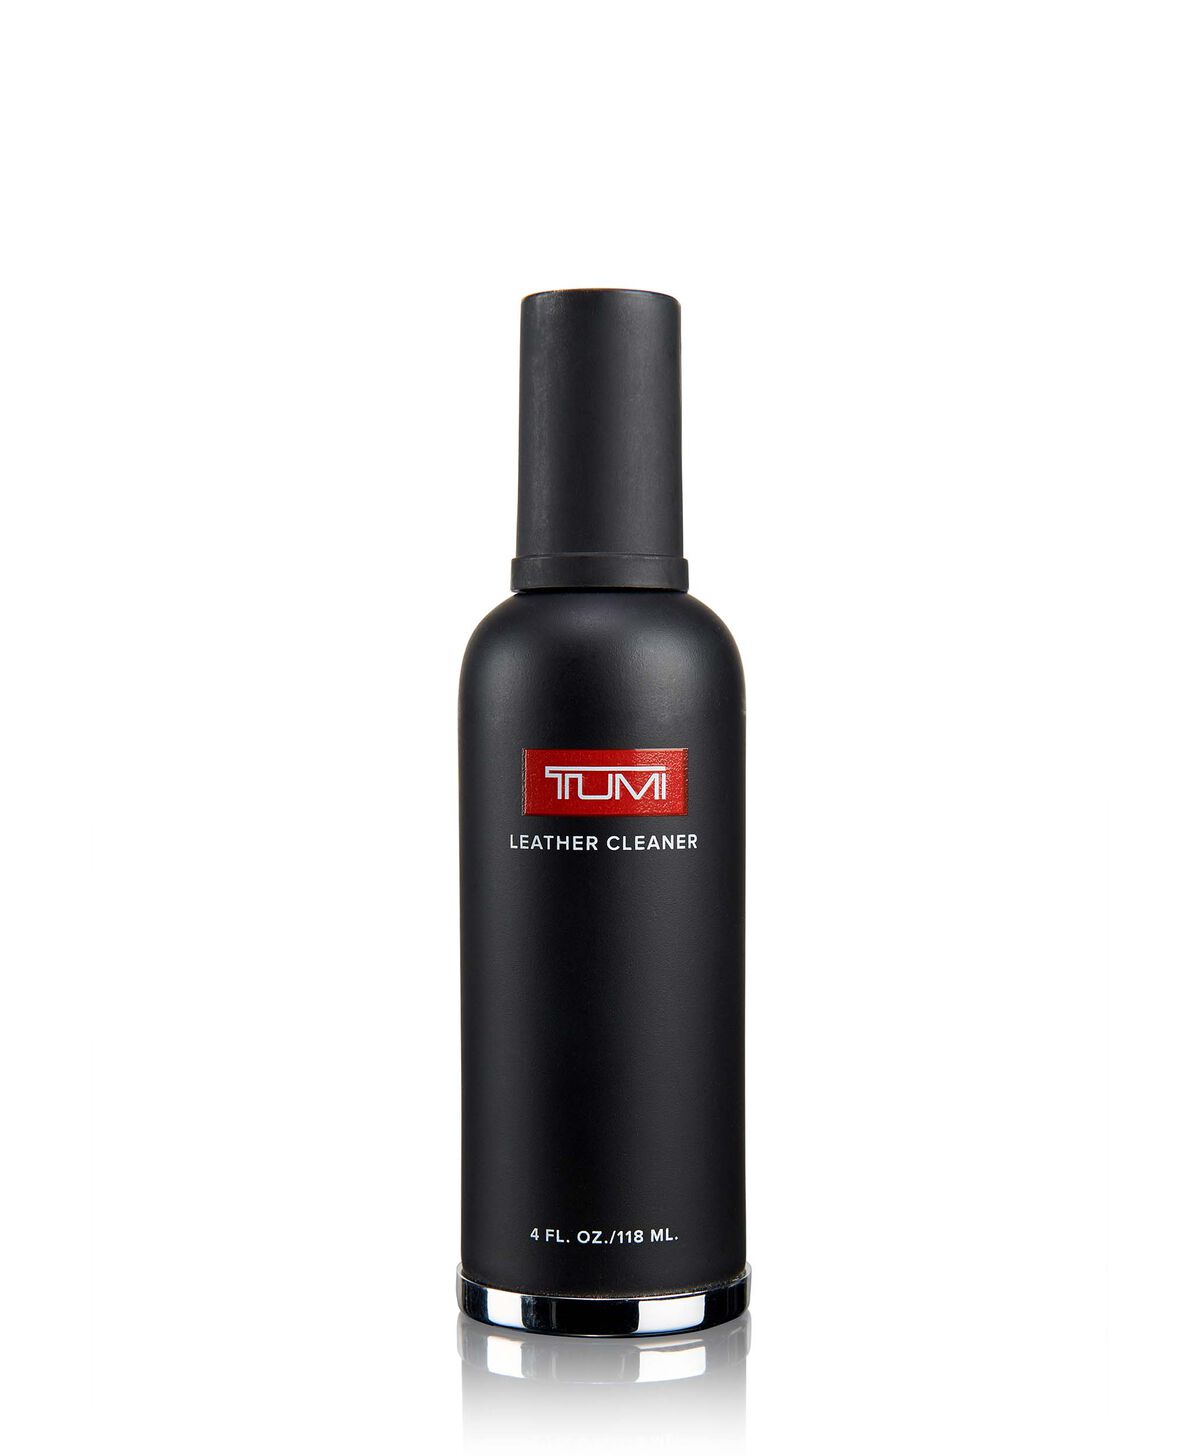 Tumi Leather Cleaner